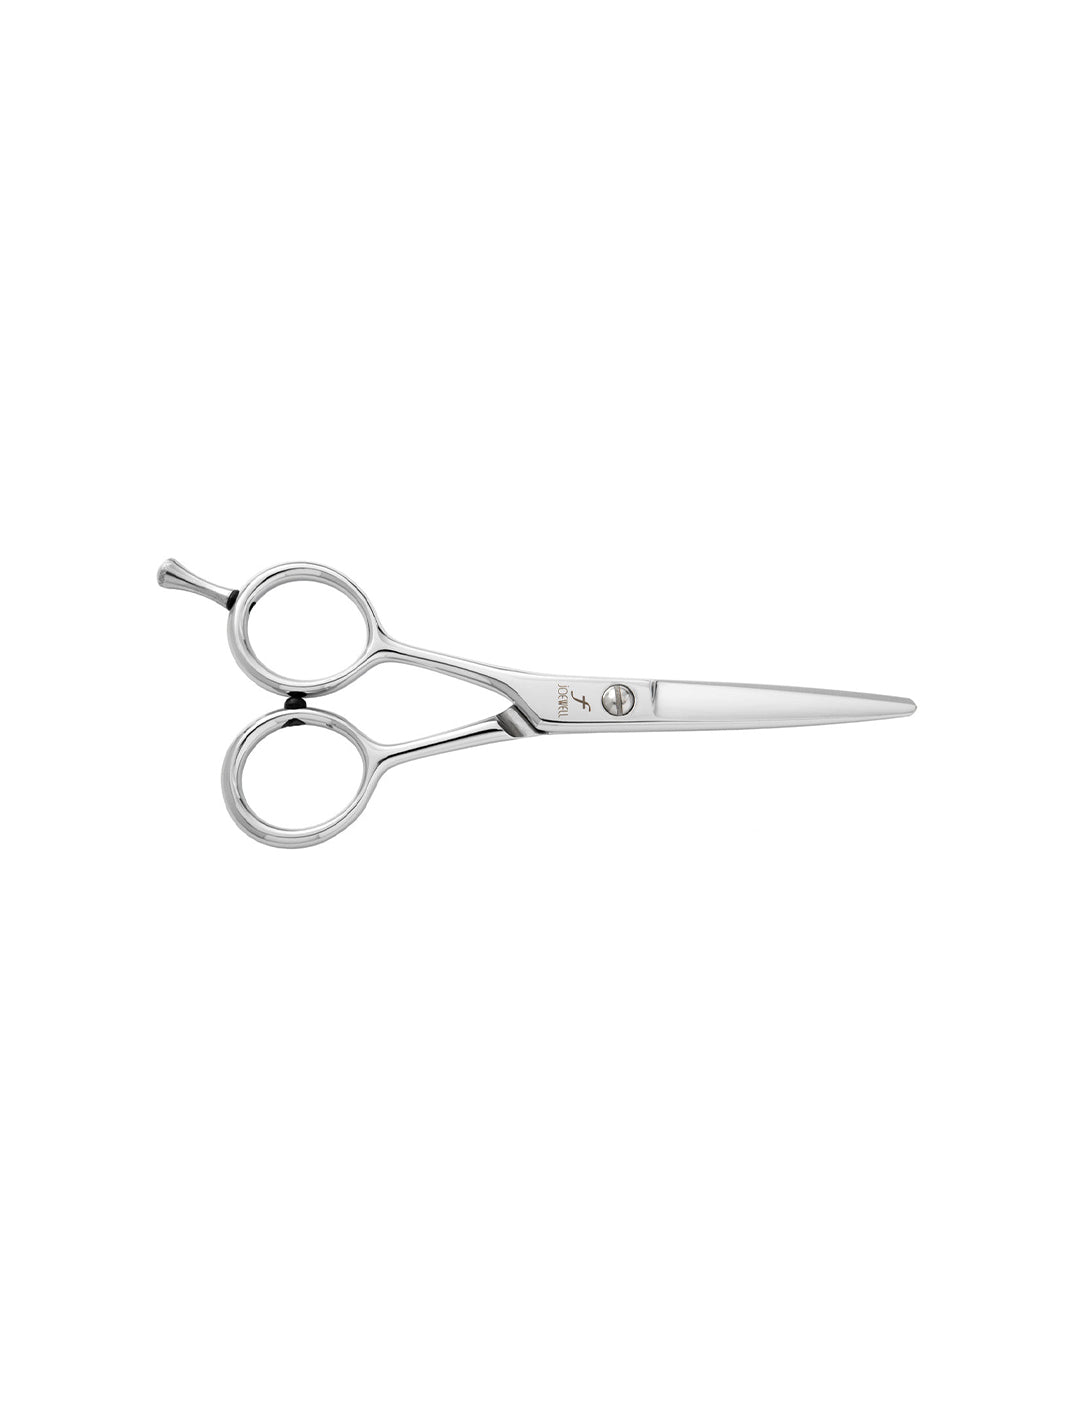 Joewell Left Handed Classic Shears - LC (5in / 6in)